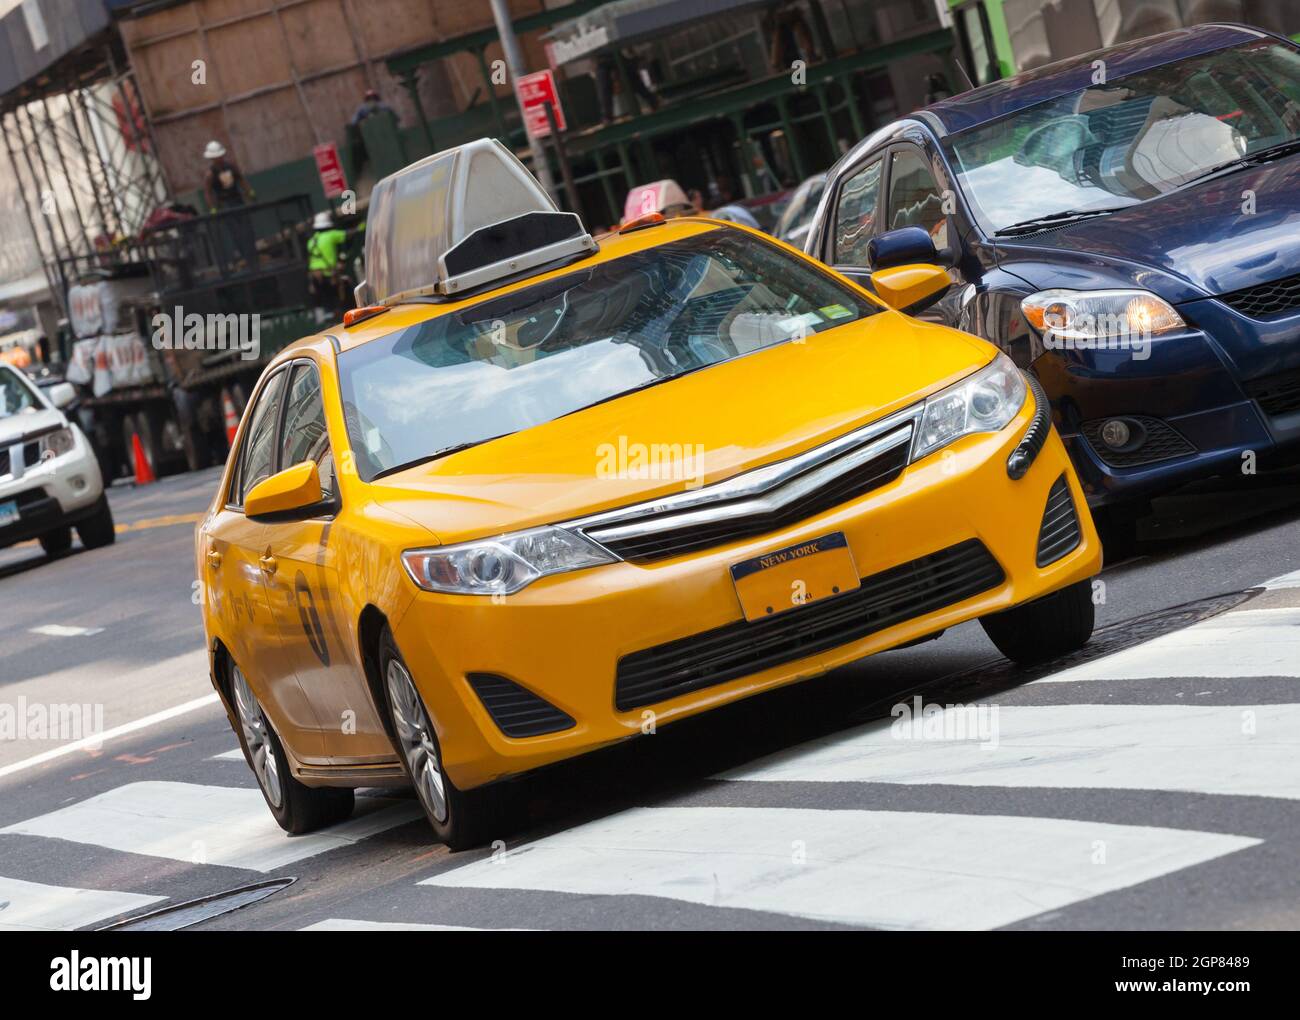 Yellow cab in Manhattan, NYC. The taxicabs of New York City are widely recognized icons of the city. Stock Photo